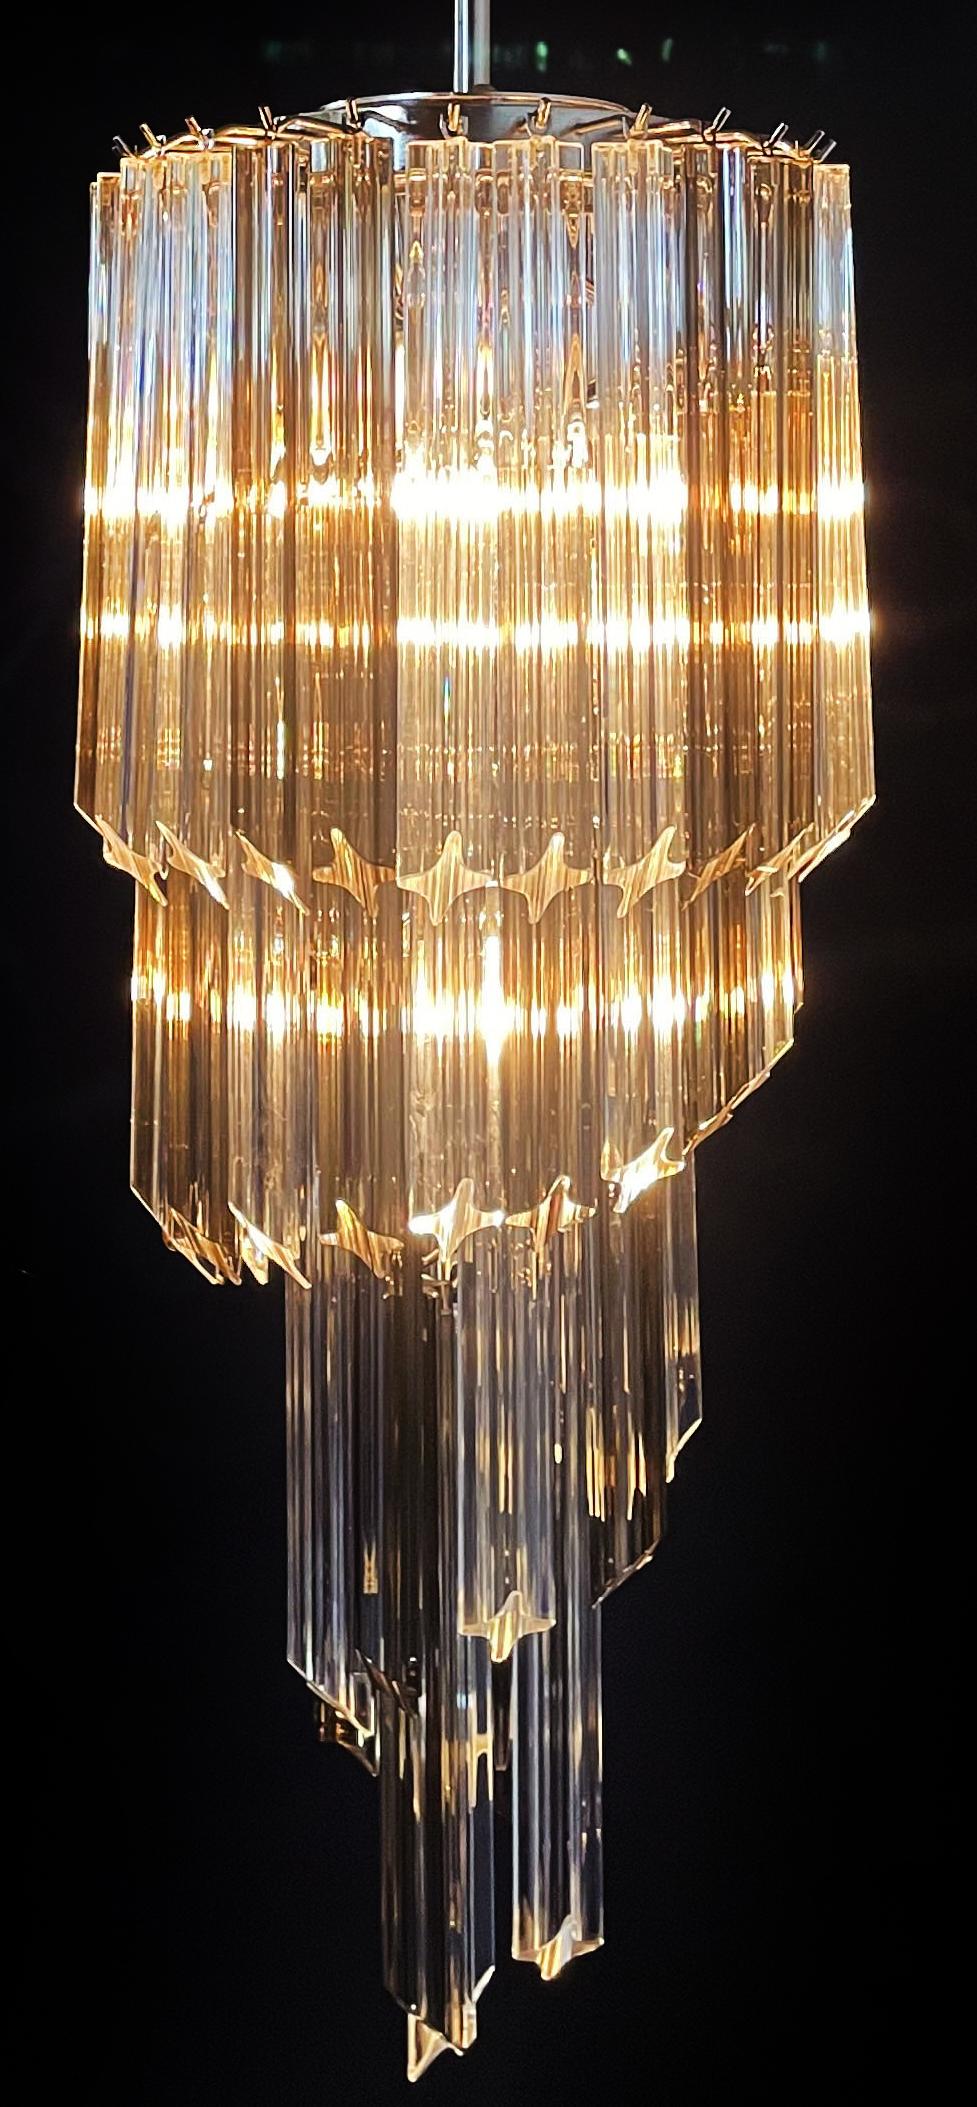 Late 20th Century Sophisticated Murano Chandeliers – 54 quadriedri prisms transparent and smoked For Sale